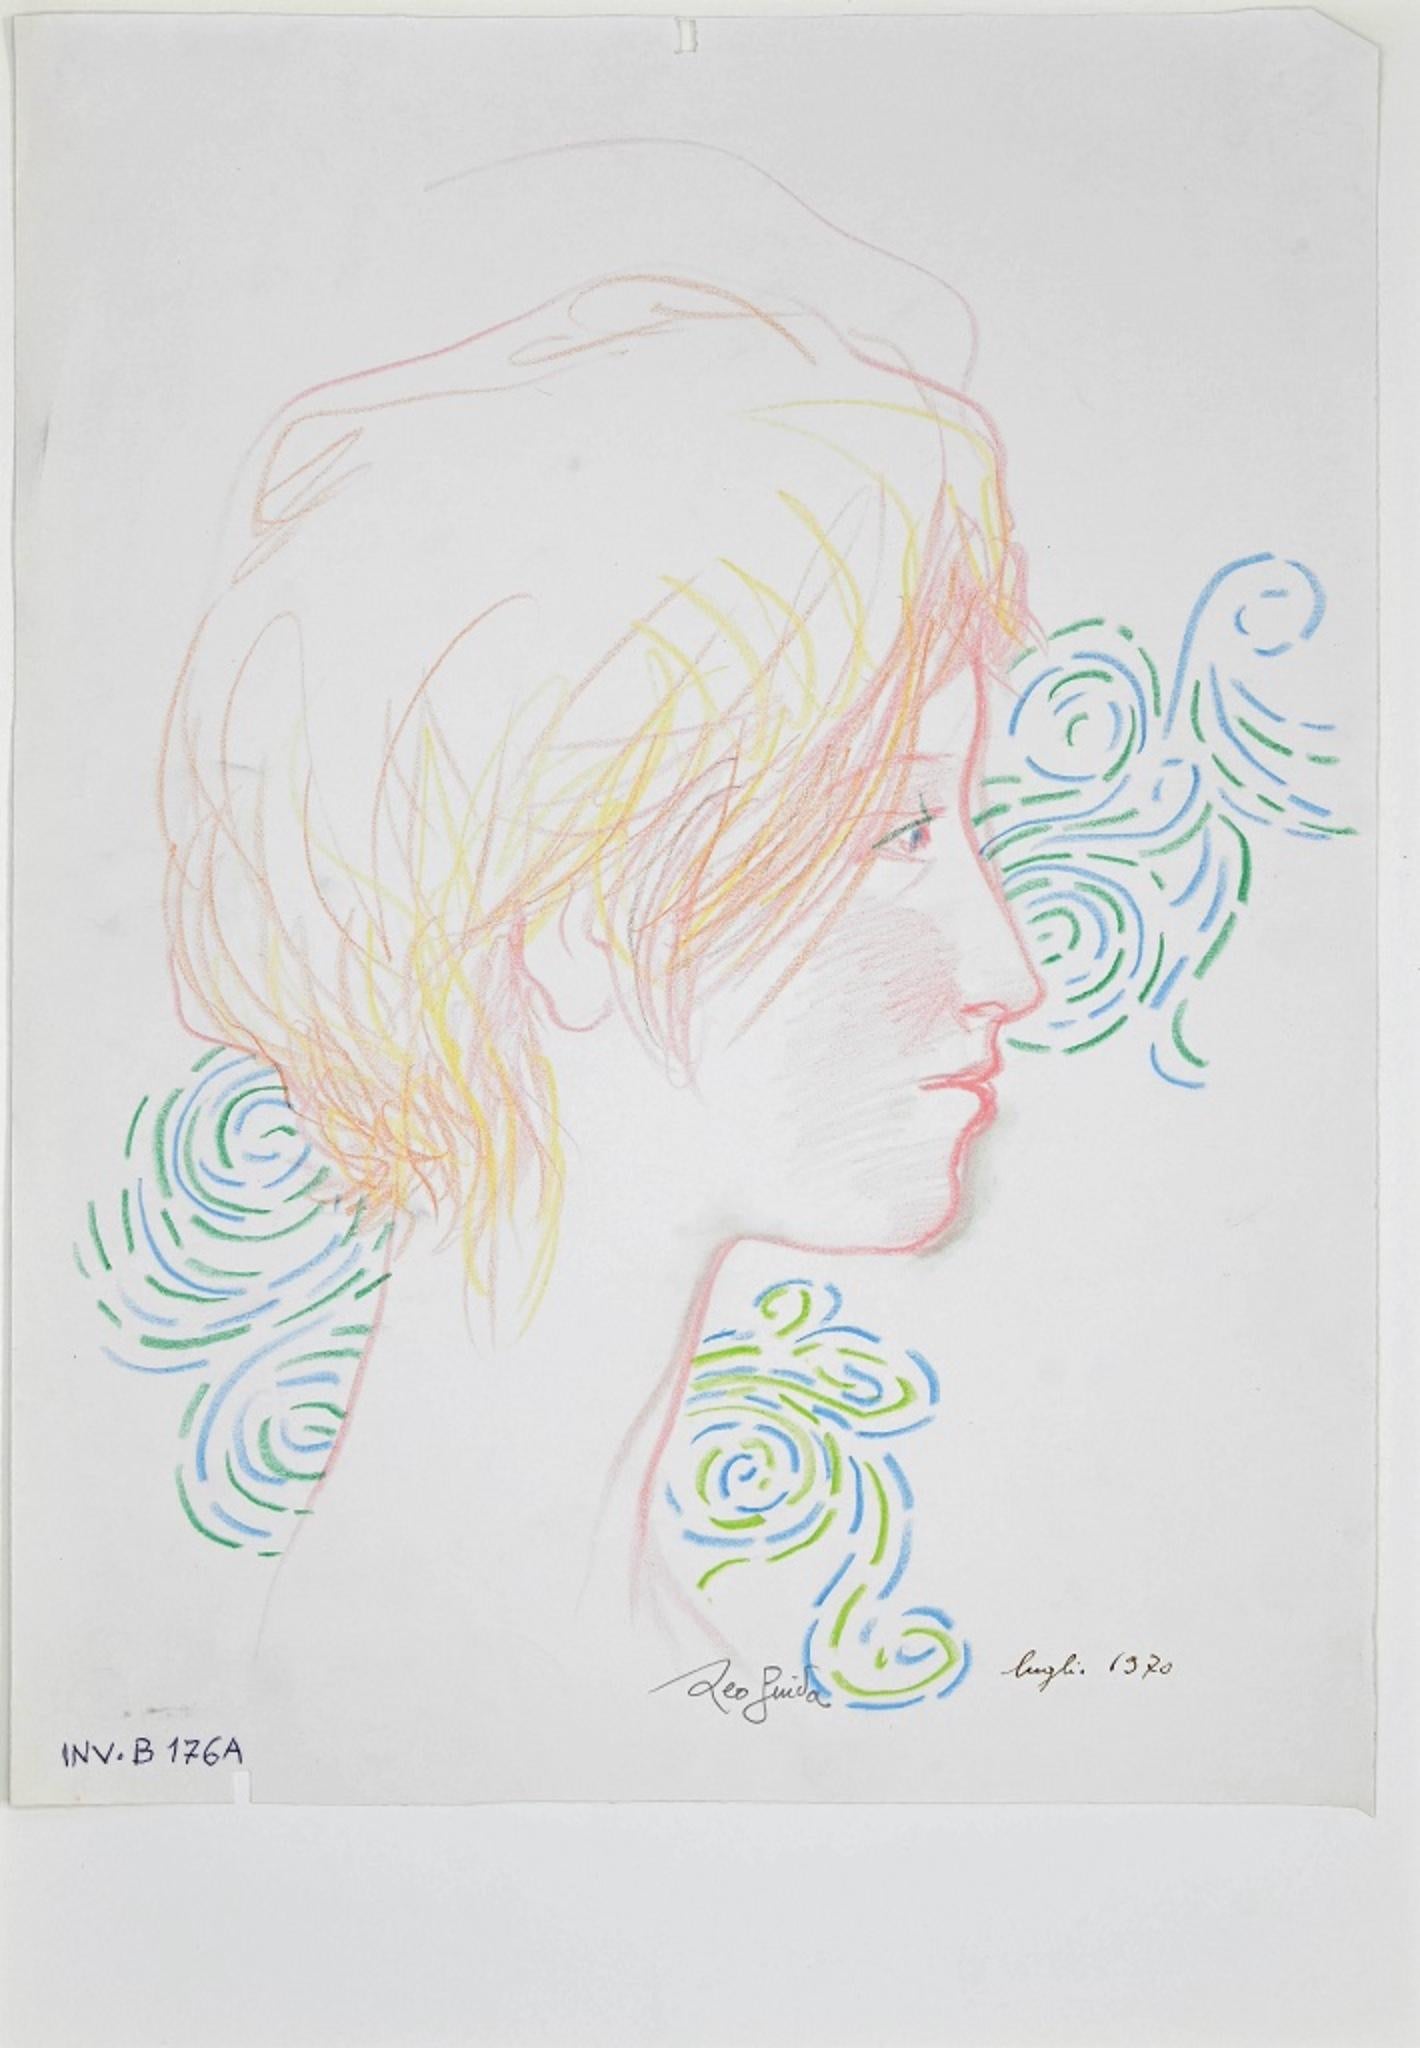 Female Portrait is an original Contemporary artwork realized in 1970 by the italian artist Leo Guida.

Original Ink and Pastel Drawing.
 
Hand-signed in pencil and Dated in ink on the lower right margin: Leo Guida Luglio 1970.

Mint conditions.